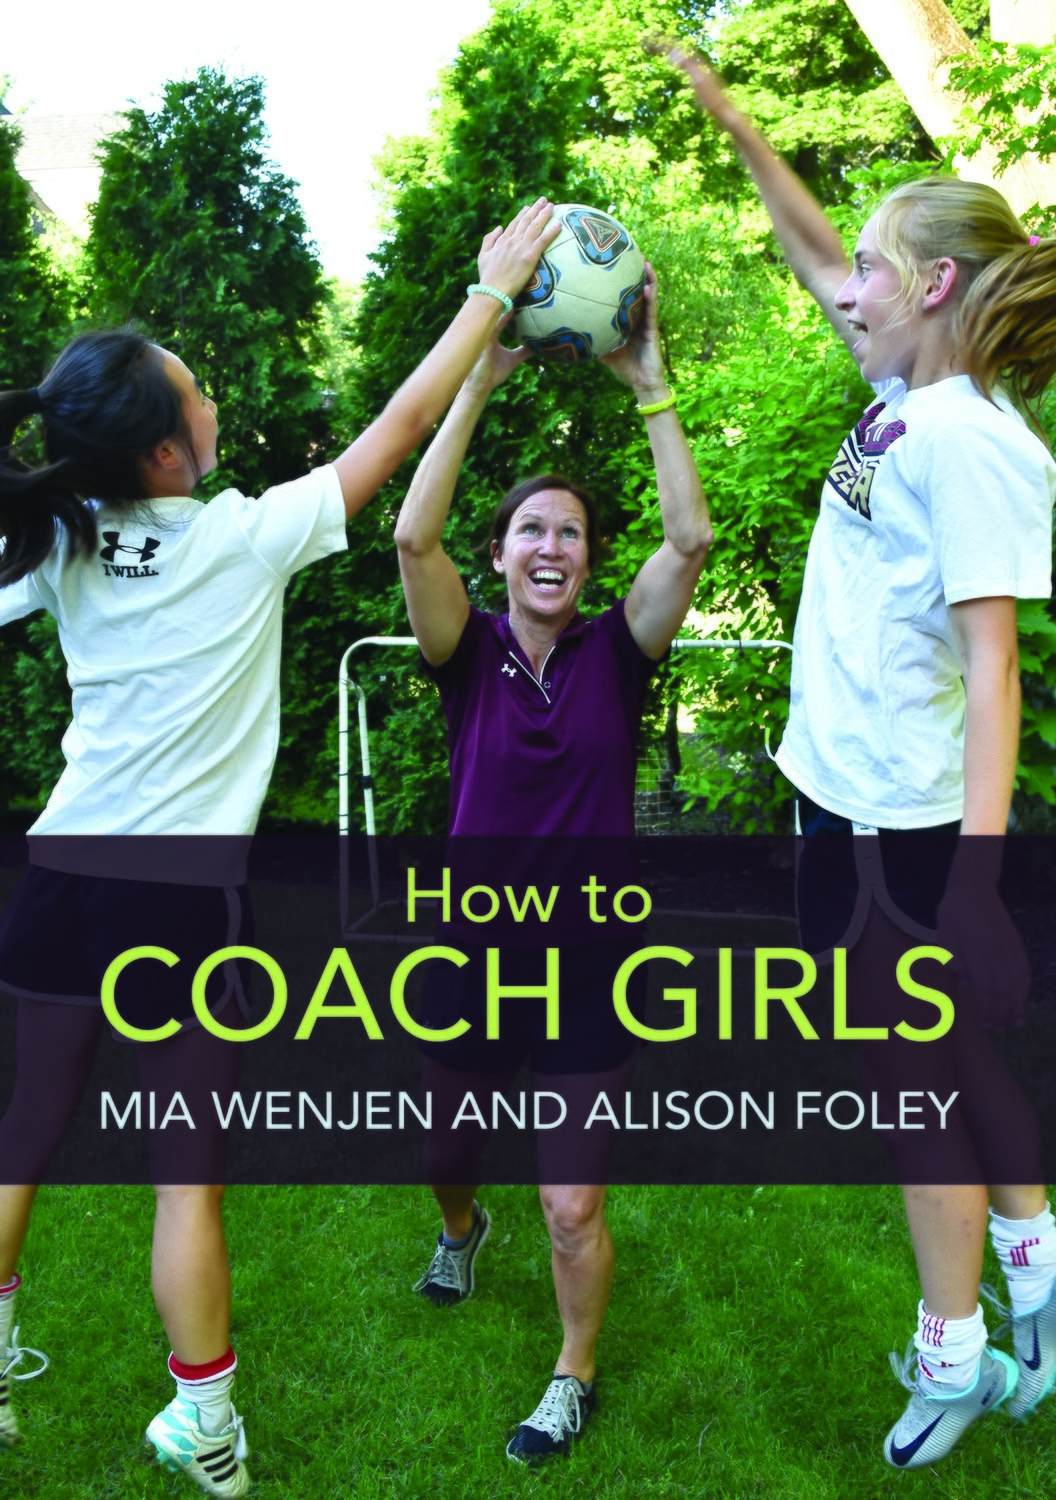 HOW TO COACH GIRLS by Mia Wenjen and Alison Foley  (FREE SHIPPING)